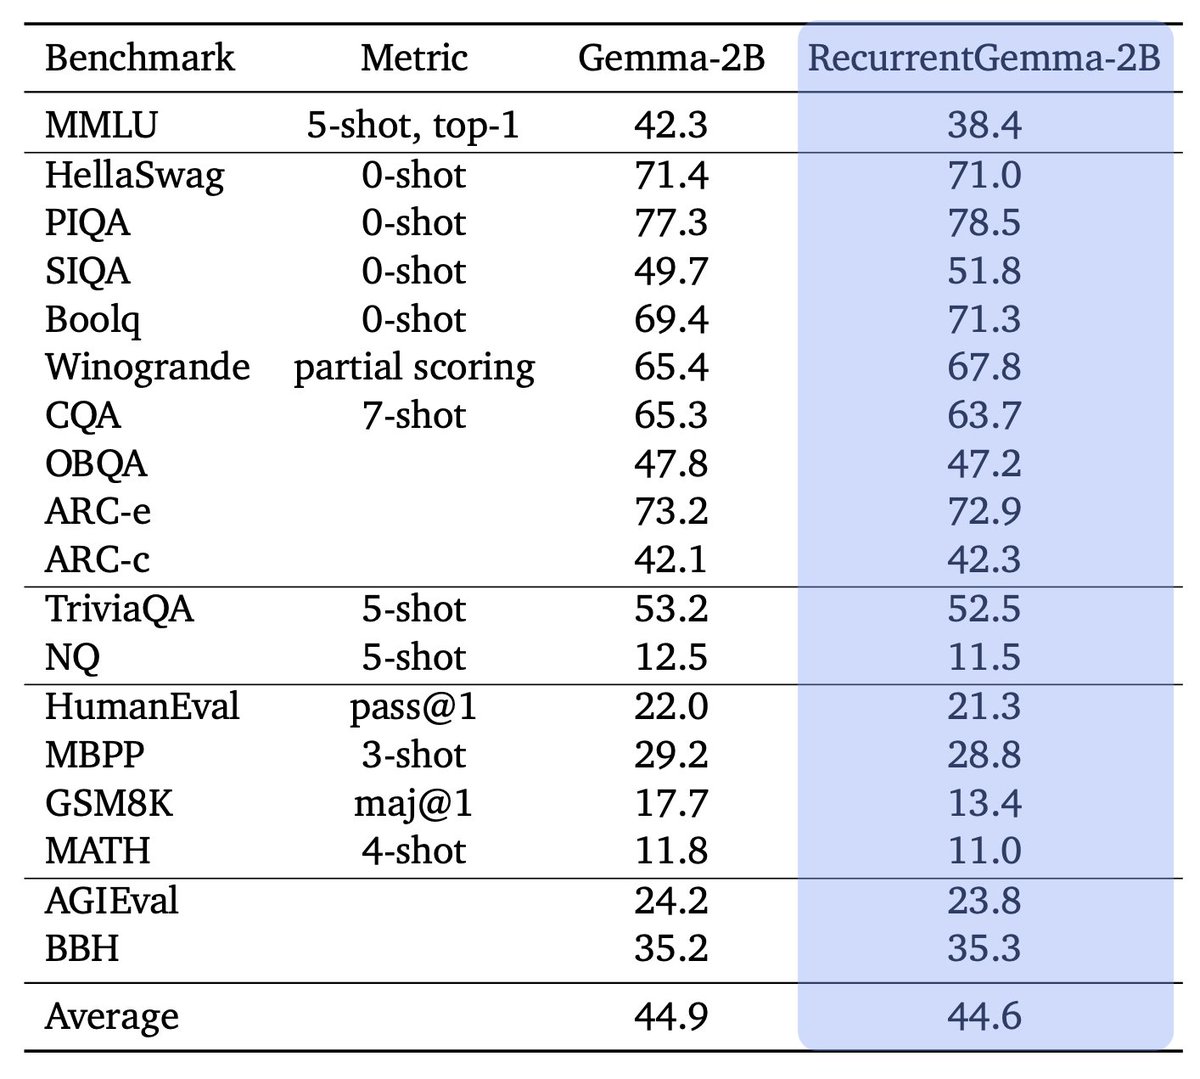 RecurrentGemma is close to Gemma-2B while being trained on 1T fewer tokens (!), making it one of the strongest open models at 2B scale. + performs very well vs much larger 7B Mistral on human evals testing instruction following and safety. Details here: storage.googleapis.com/deepmind-media…